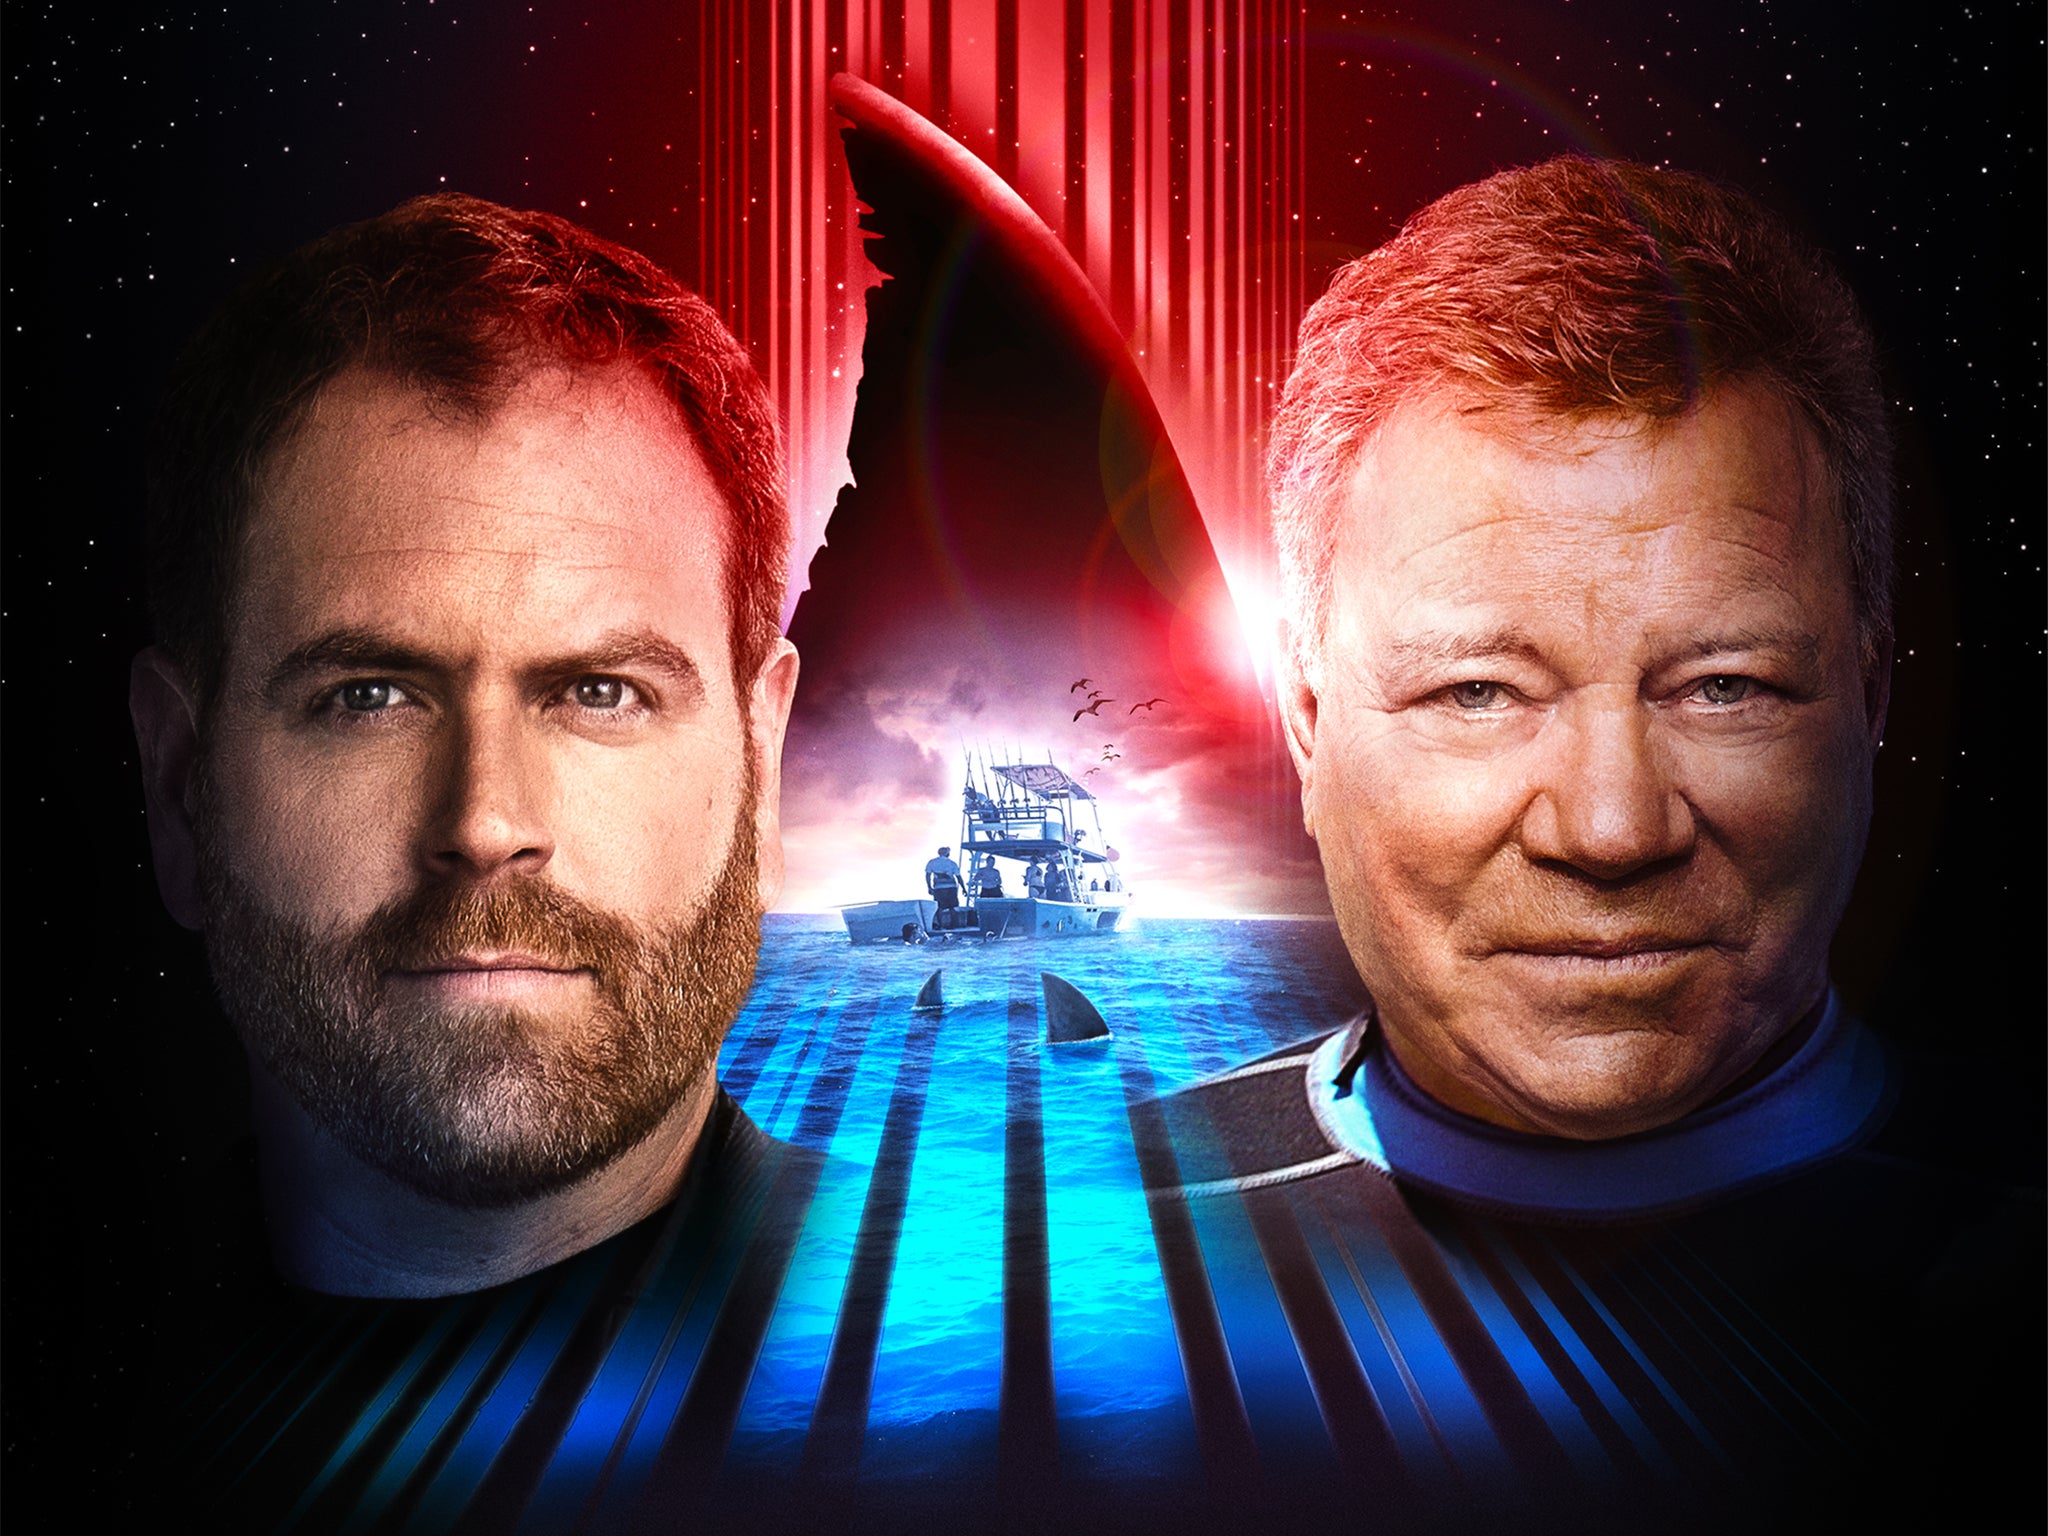 William Shatner and co-host Josh Gates travelled to the Bahamas to film the documentary